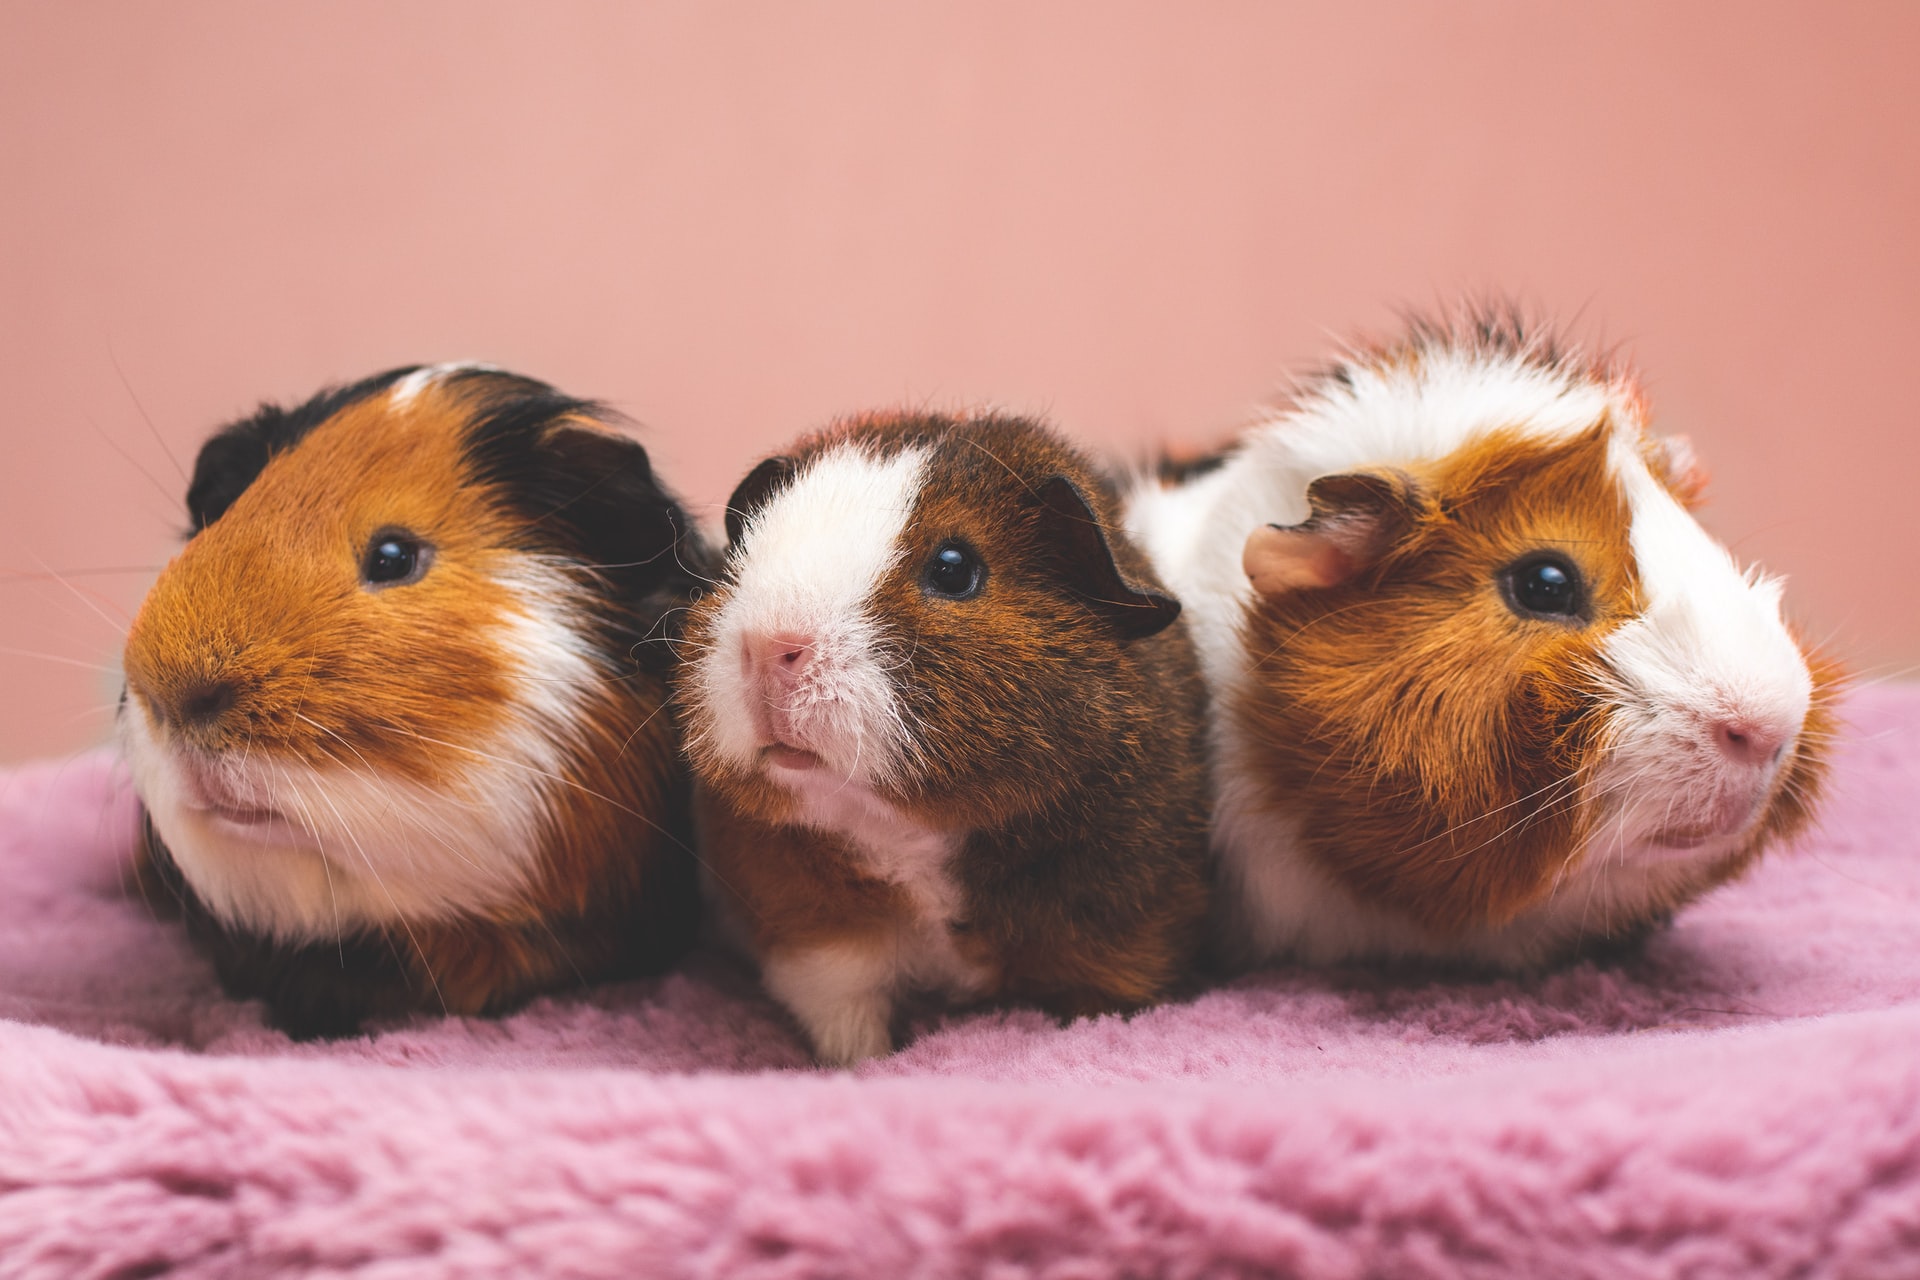 Guinea pigs are pack animals and do better in pairs or even groups